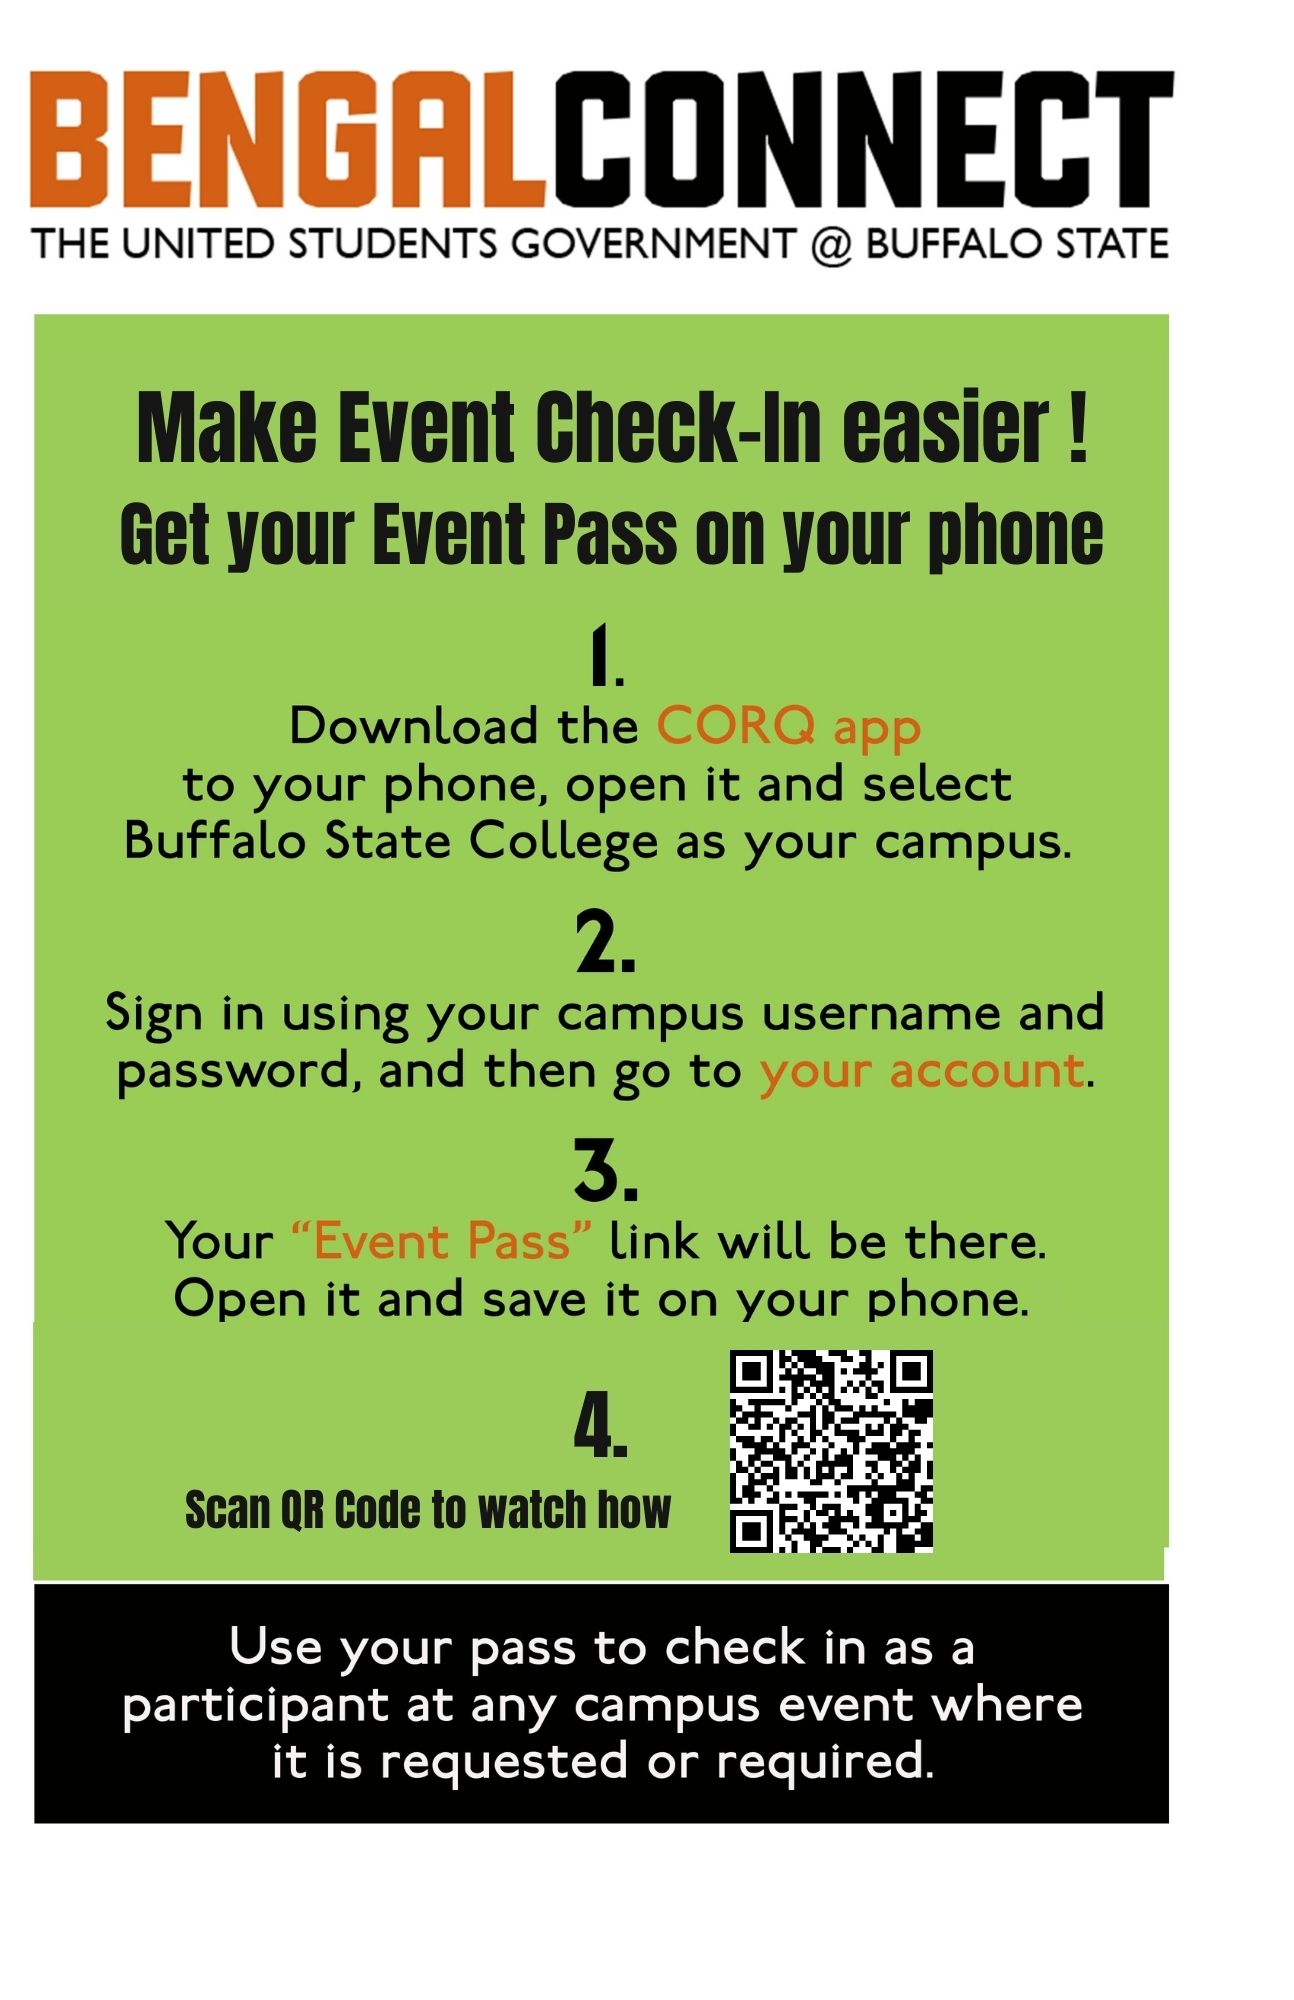 Instructions to get your Event Pass